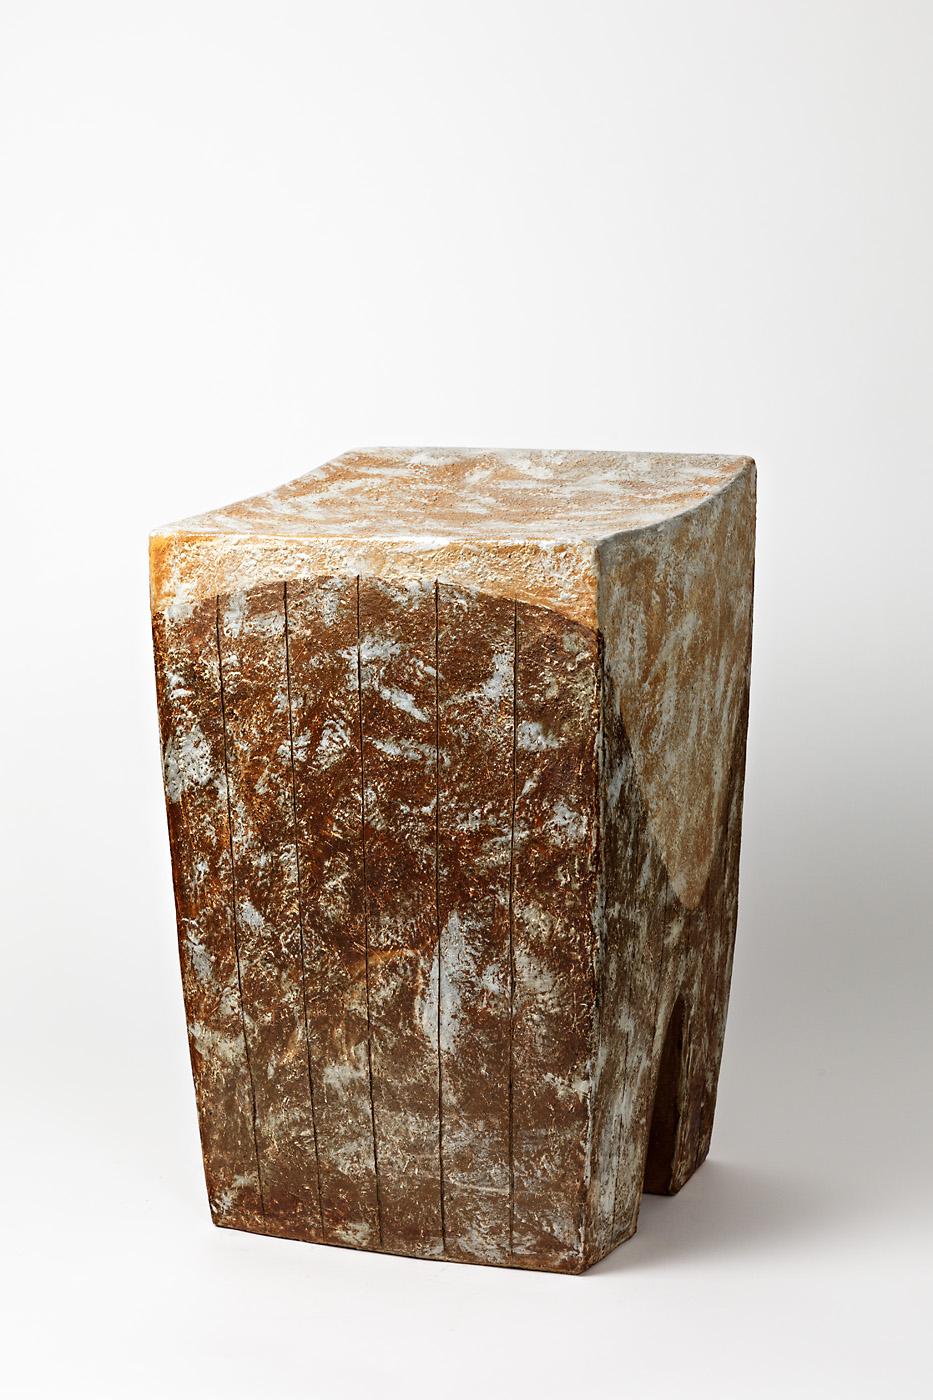 Beaux Arts Stoneware Stool by M. Georg, 2017